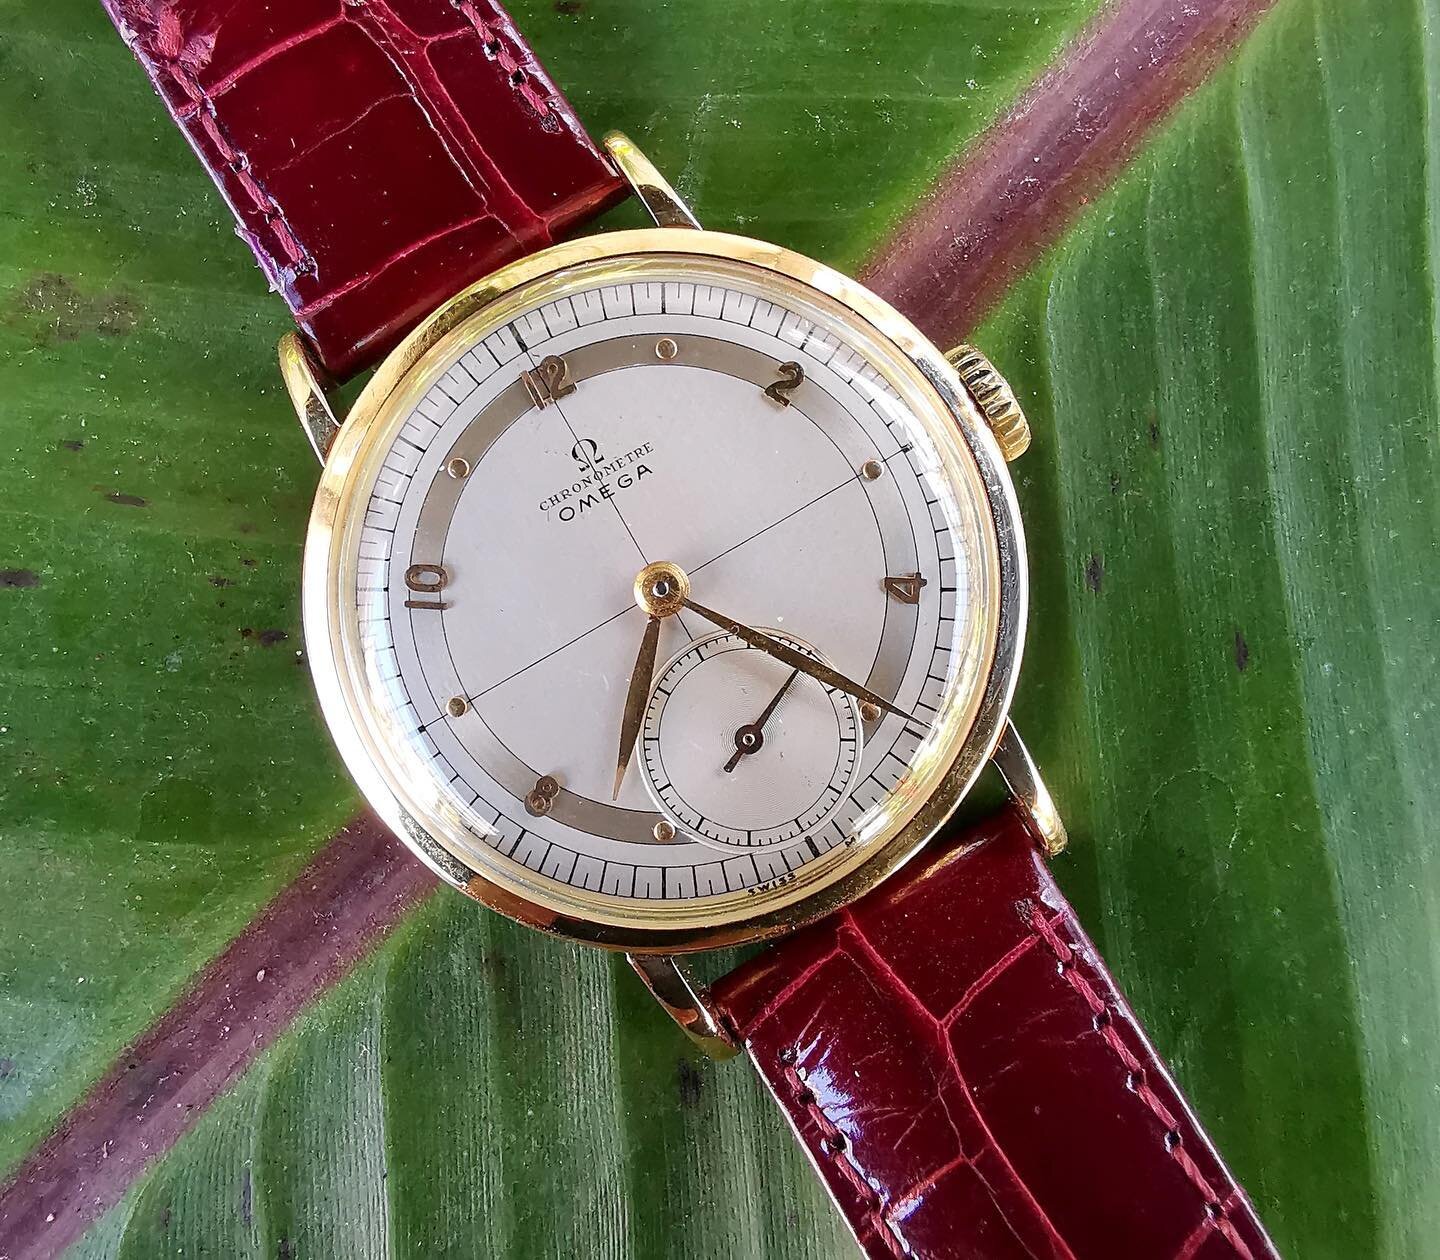 Discover our vintage OMEGA WATCHES &ndash; Vintage Friday

https://www.abouttime.co.nz/omega_watches

Our collection of vintage Omega watches focuses on what is widely regarded as Omega's golden era, from the end of World War two through to the early